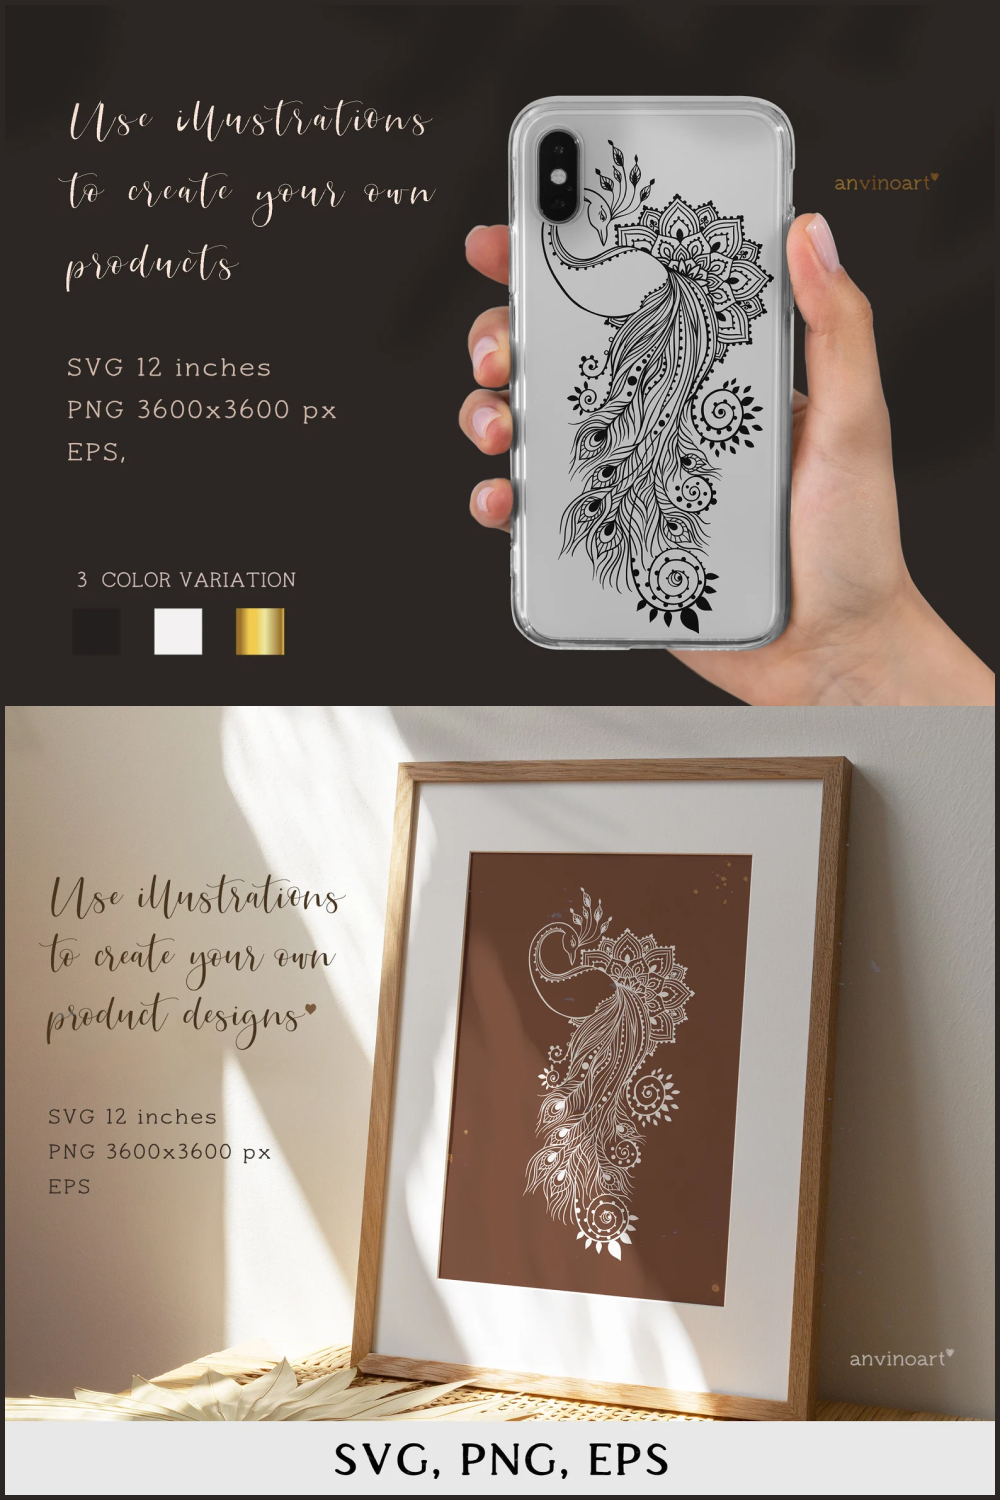 Use illustrations to create your own product.